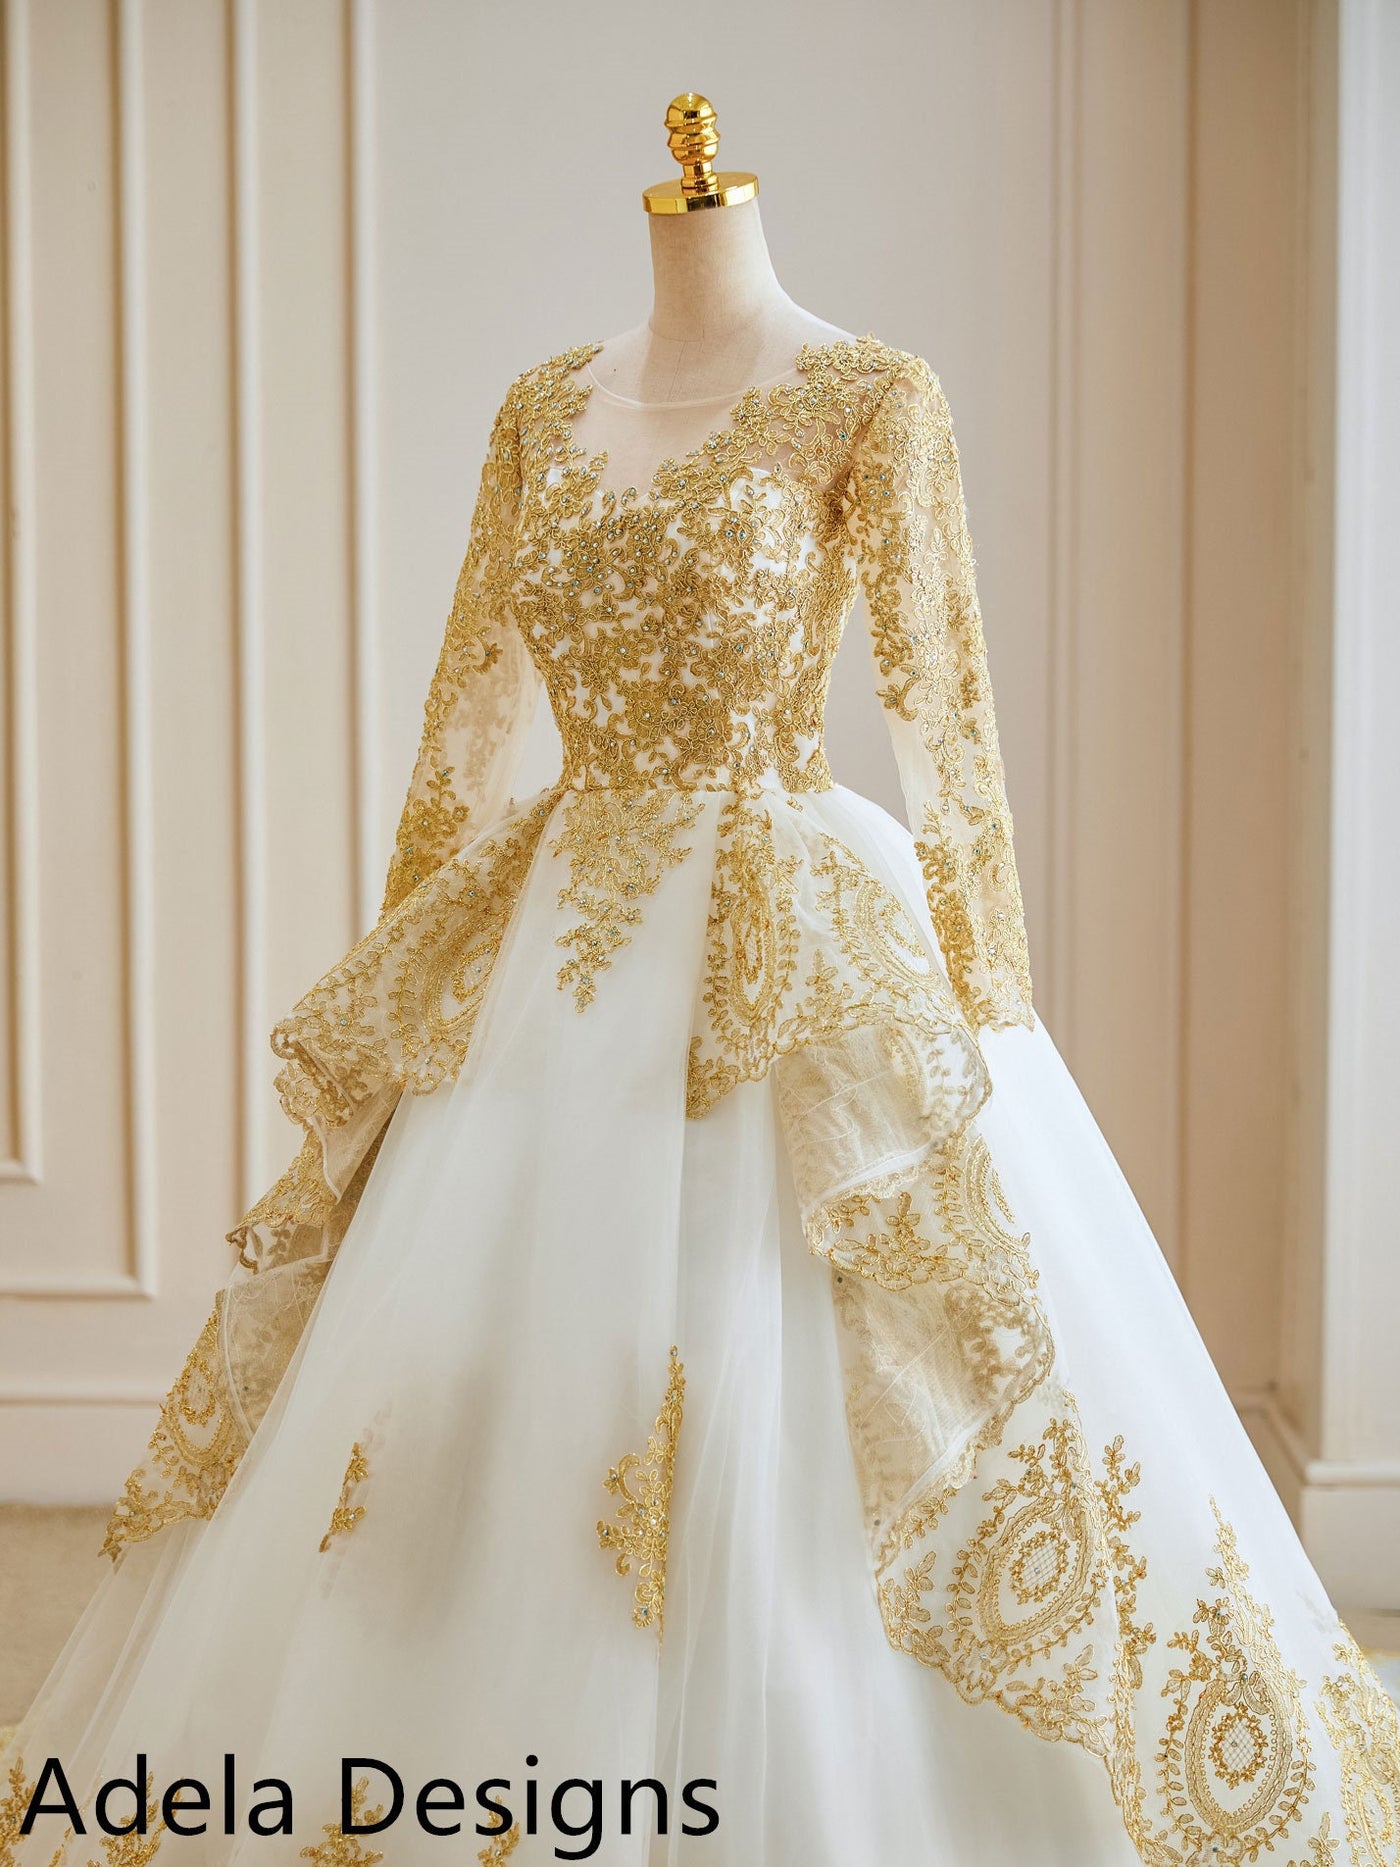 Super Unique Indian Wedding Ball Gown || Awesome Bridal Dresses Ideas 2022  | Ball gowns, Gowns, Bridal dresses